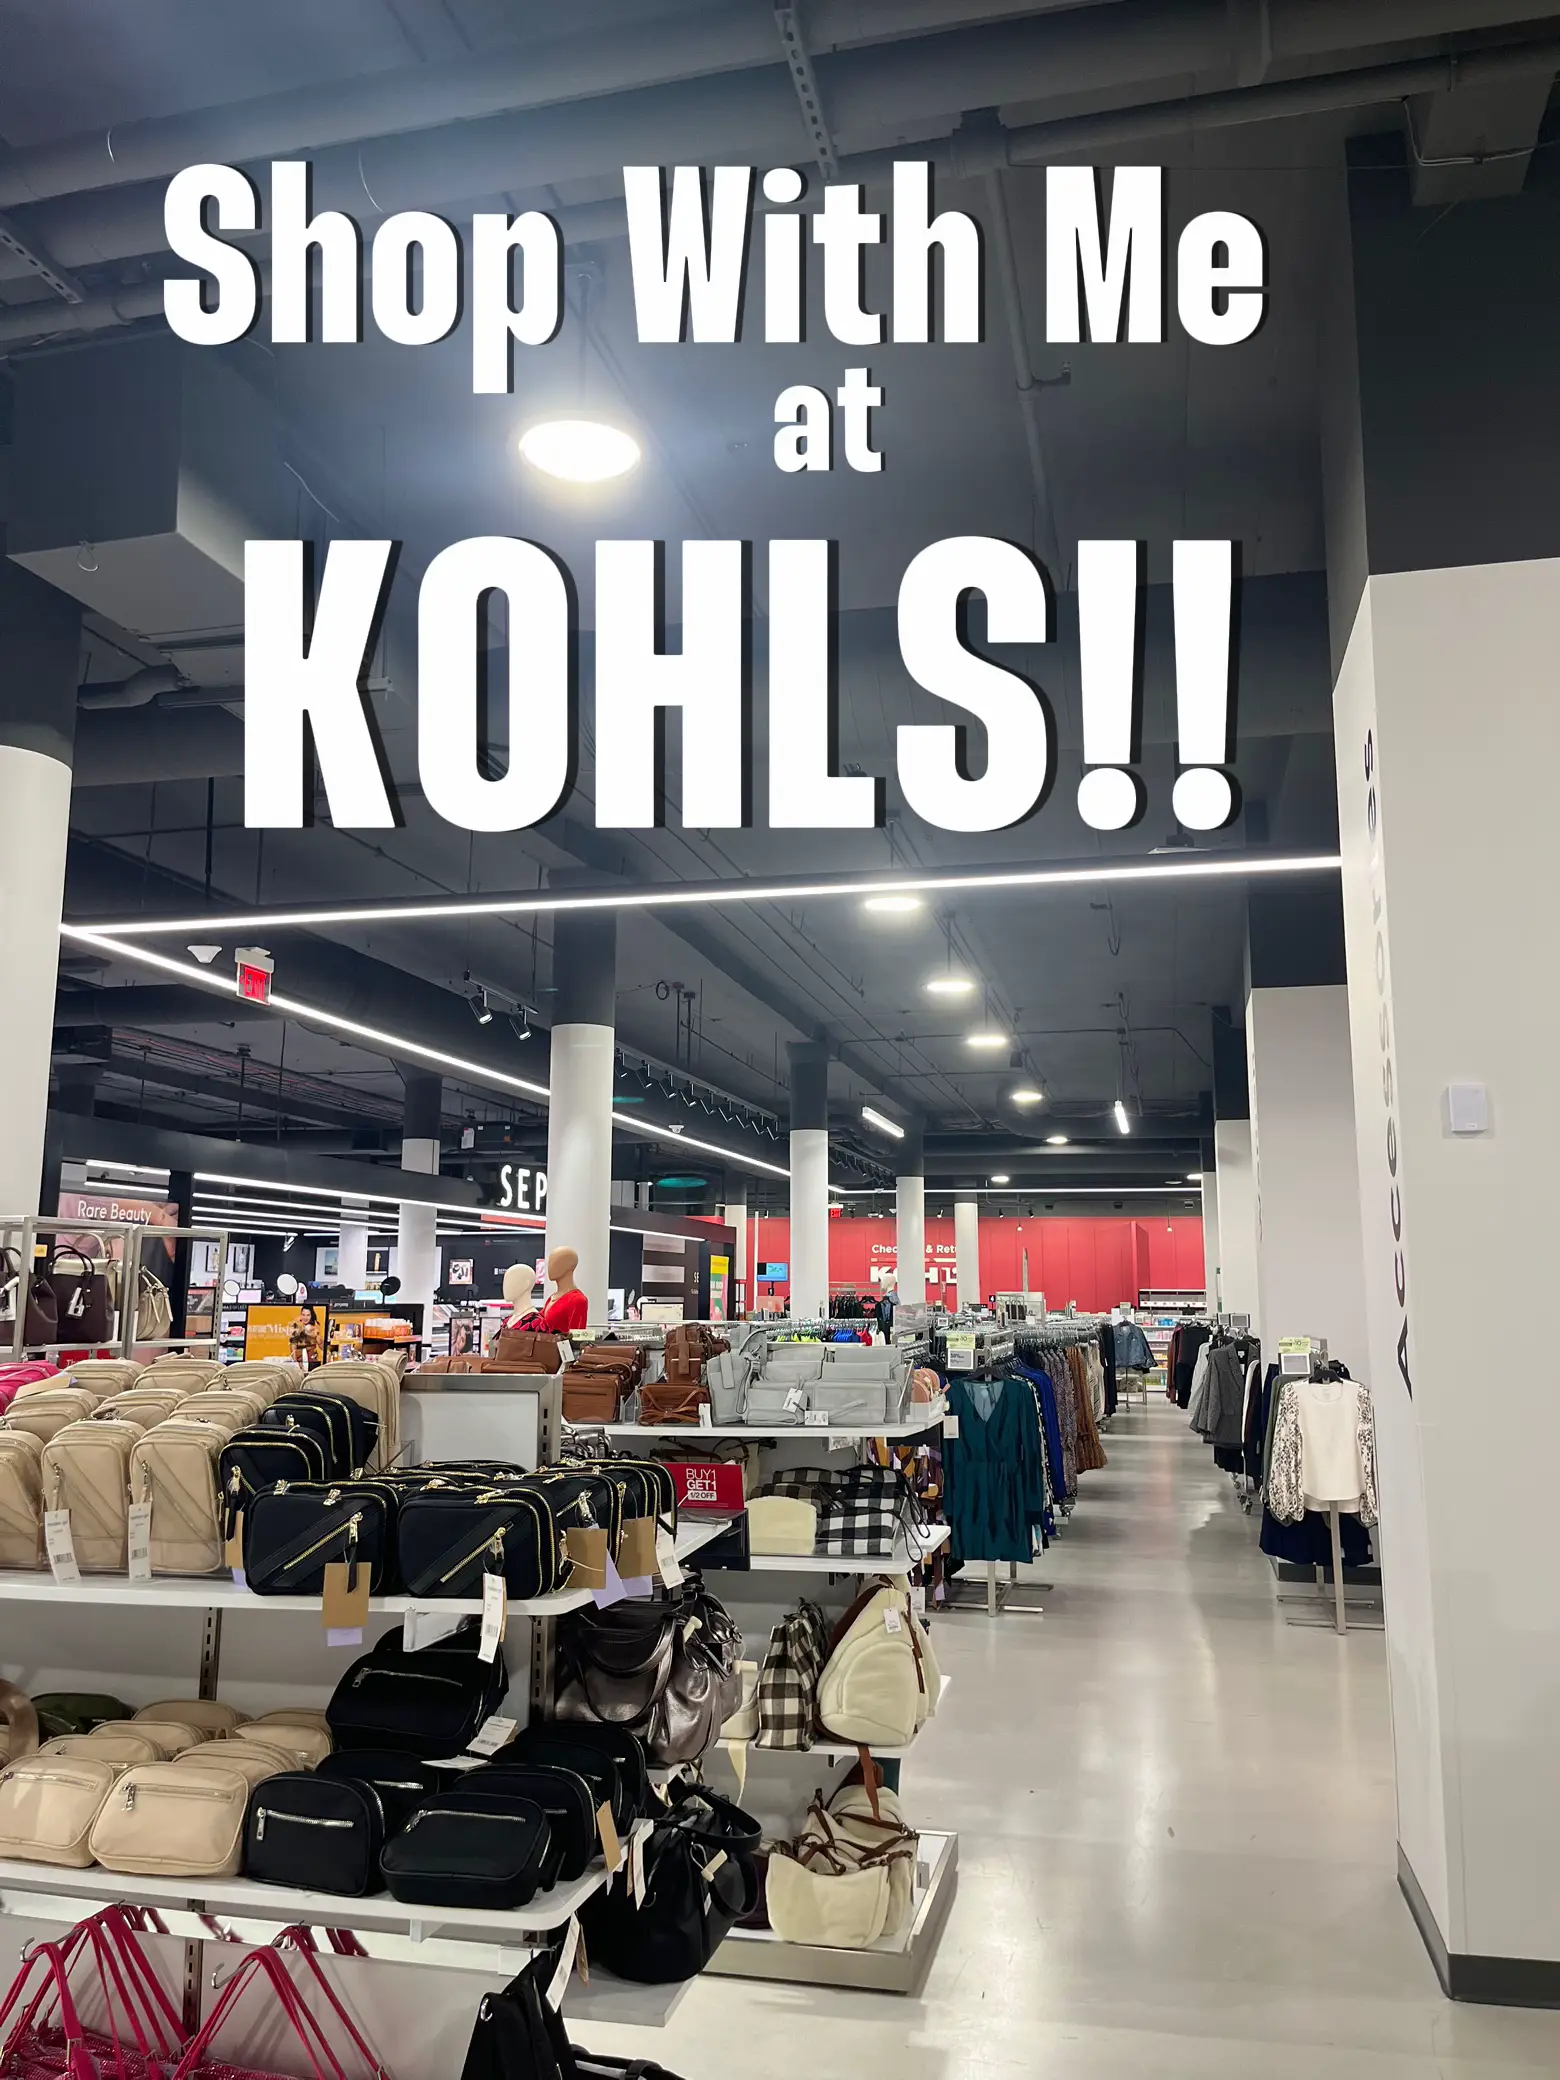 Do you love all things beauty? Join @Sephora at @Kohls + get a 15%  associate discount on all our beauty products (top brands included!).